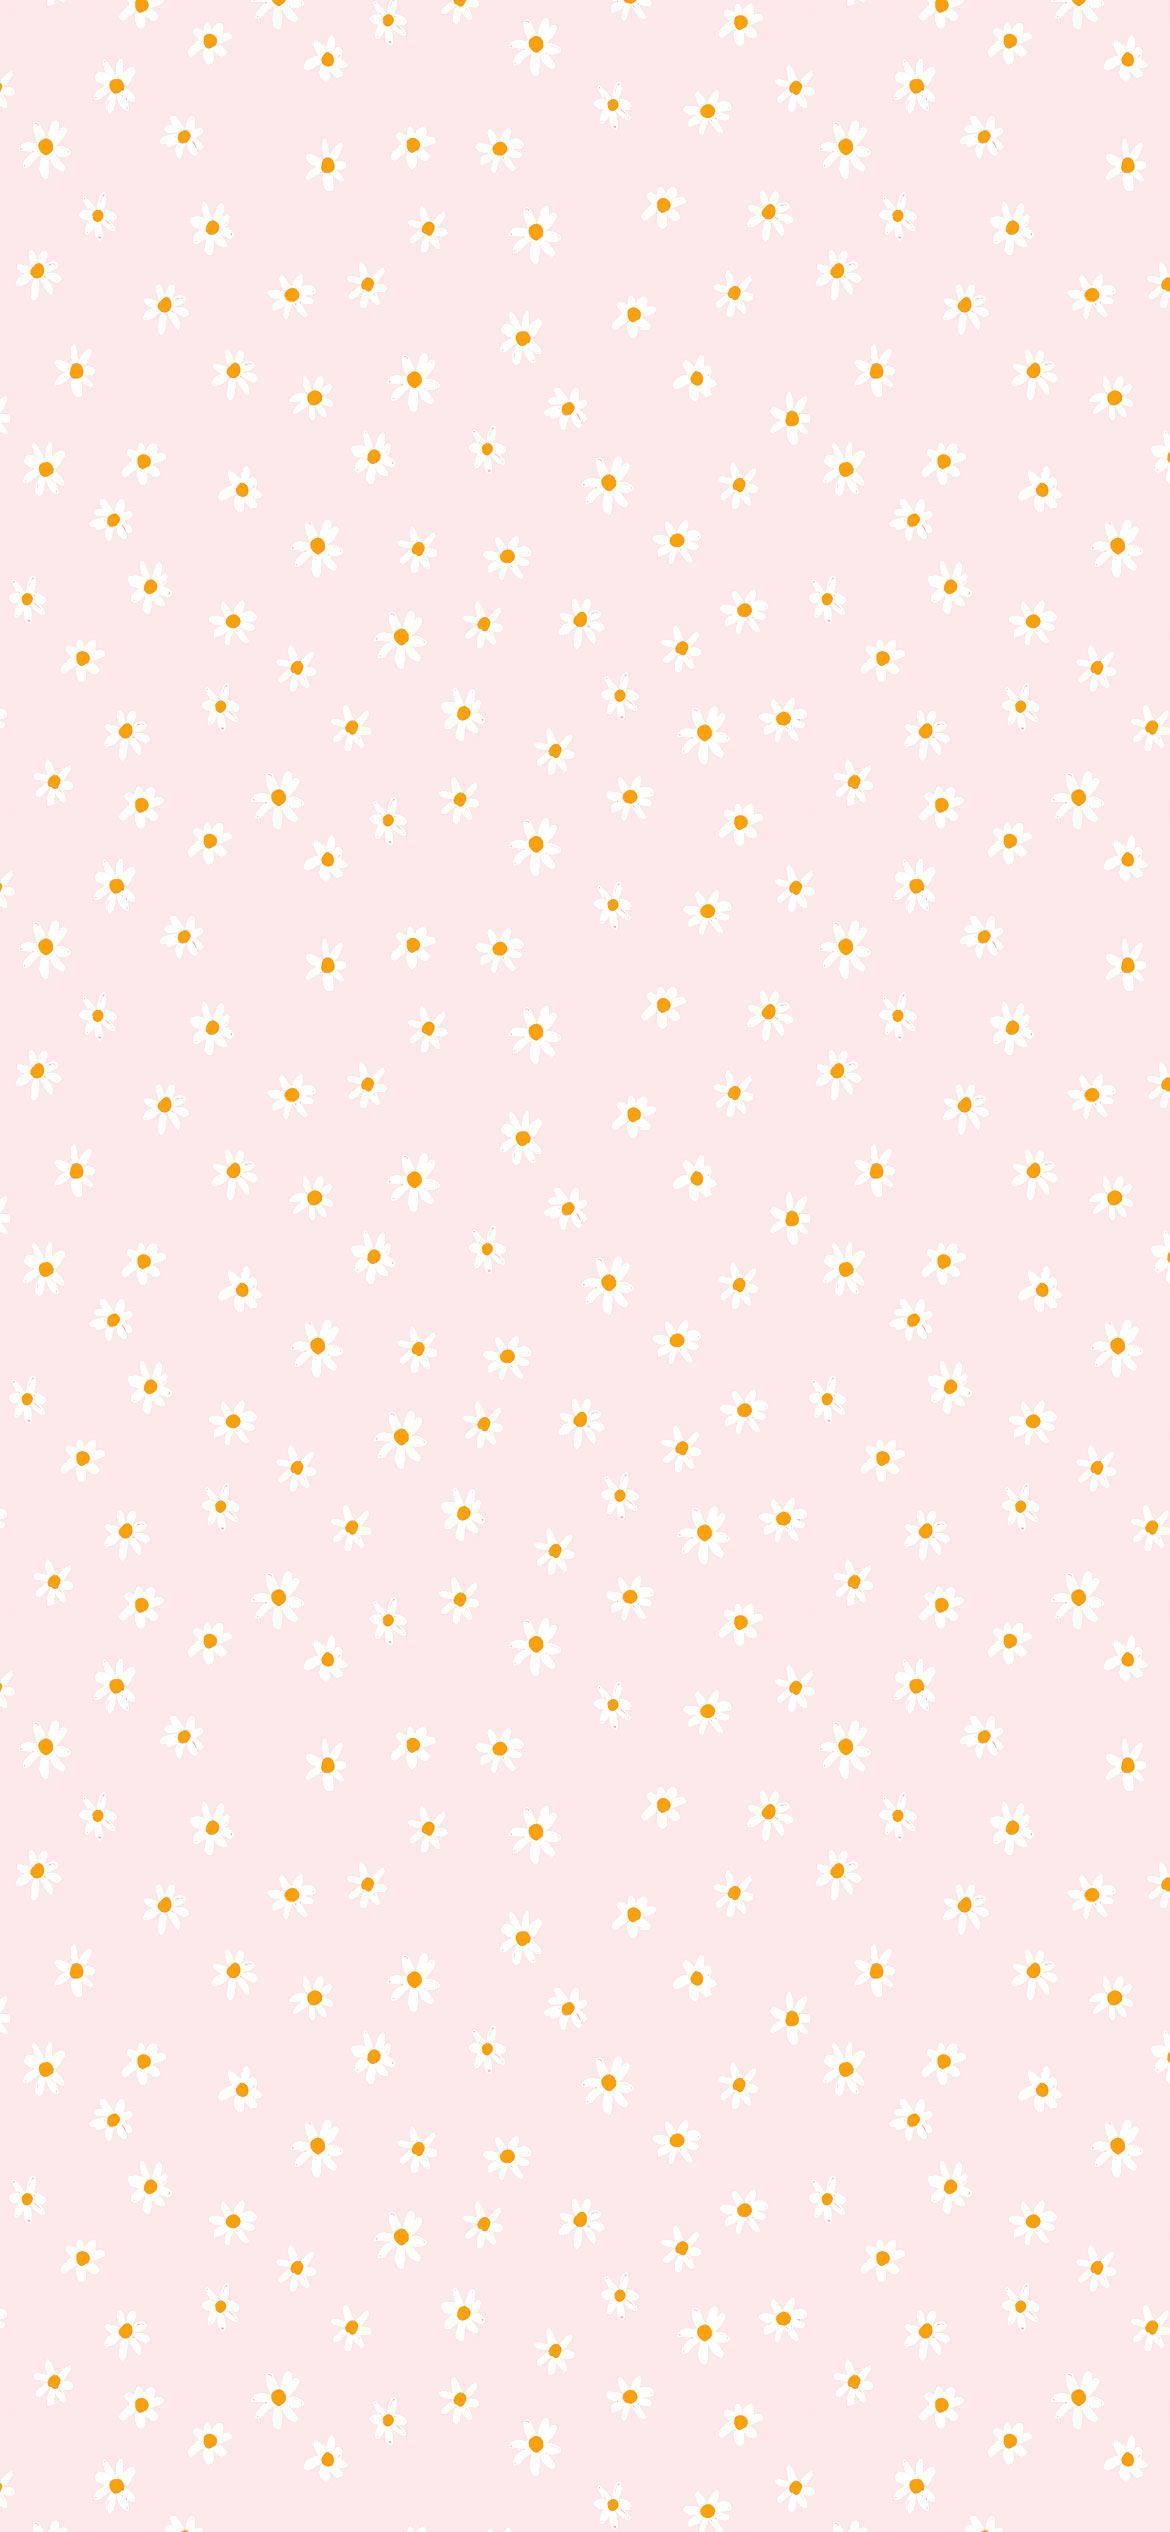 A pink background with white dots - Hot pink, light pink